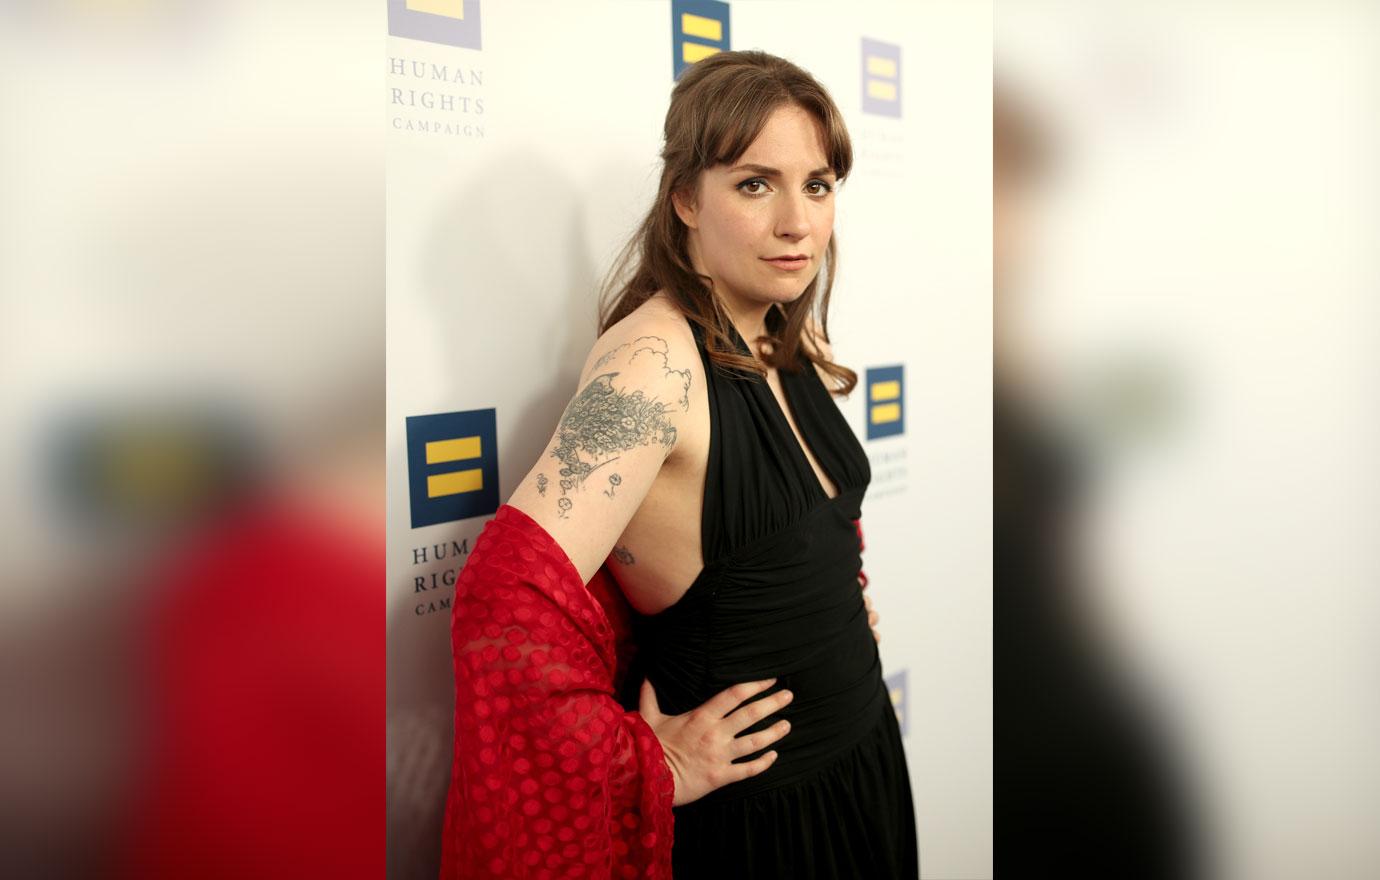 Lena Dunham shows off dramatic weight loss – New York Daily News